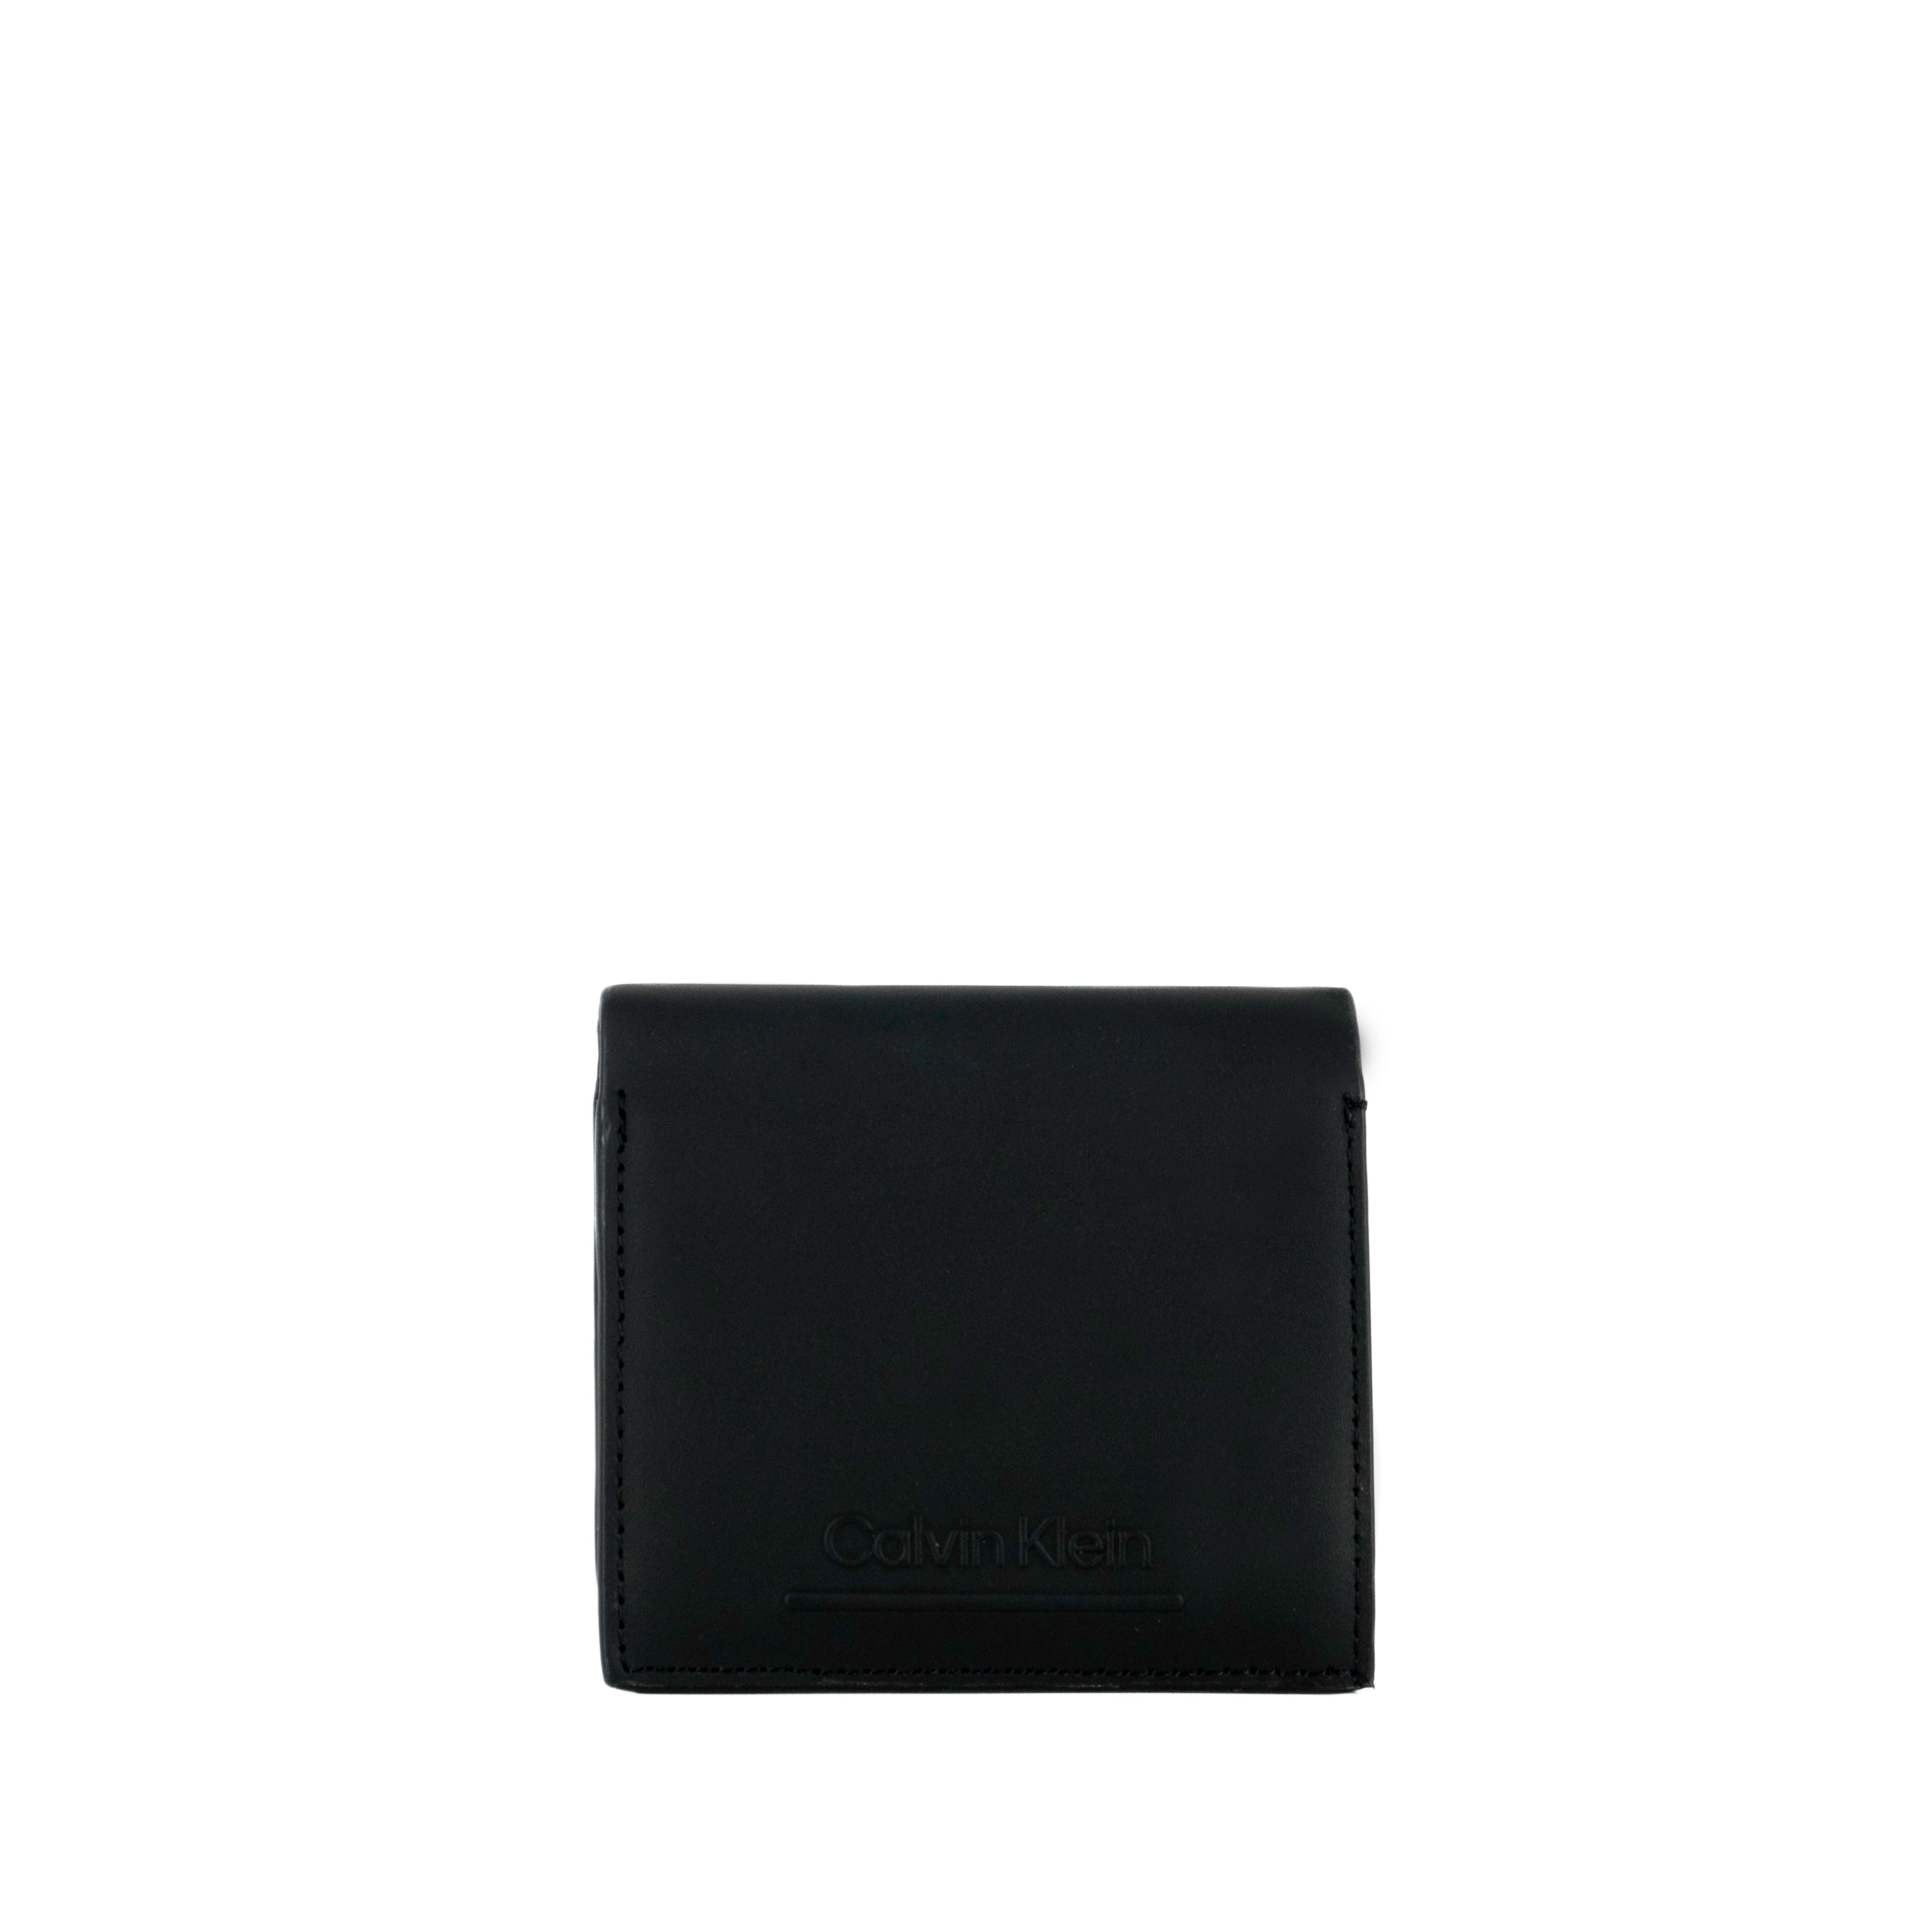 Calvin Klein Men's Trifold Leather Wallet with Coin Holder Black